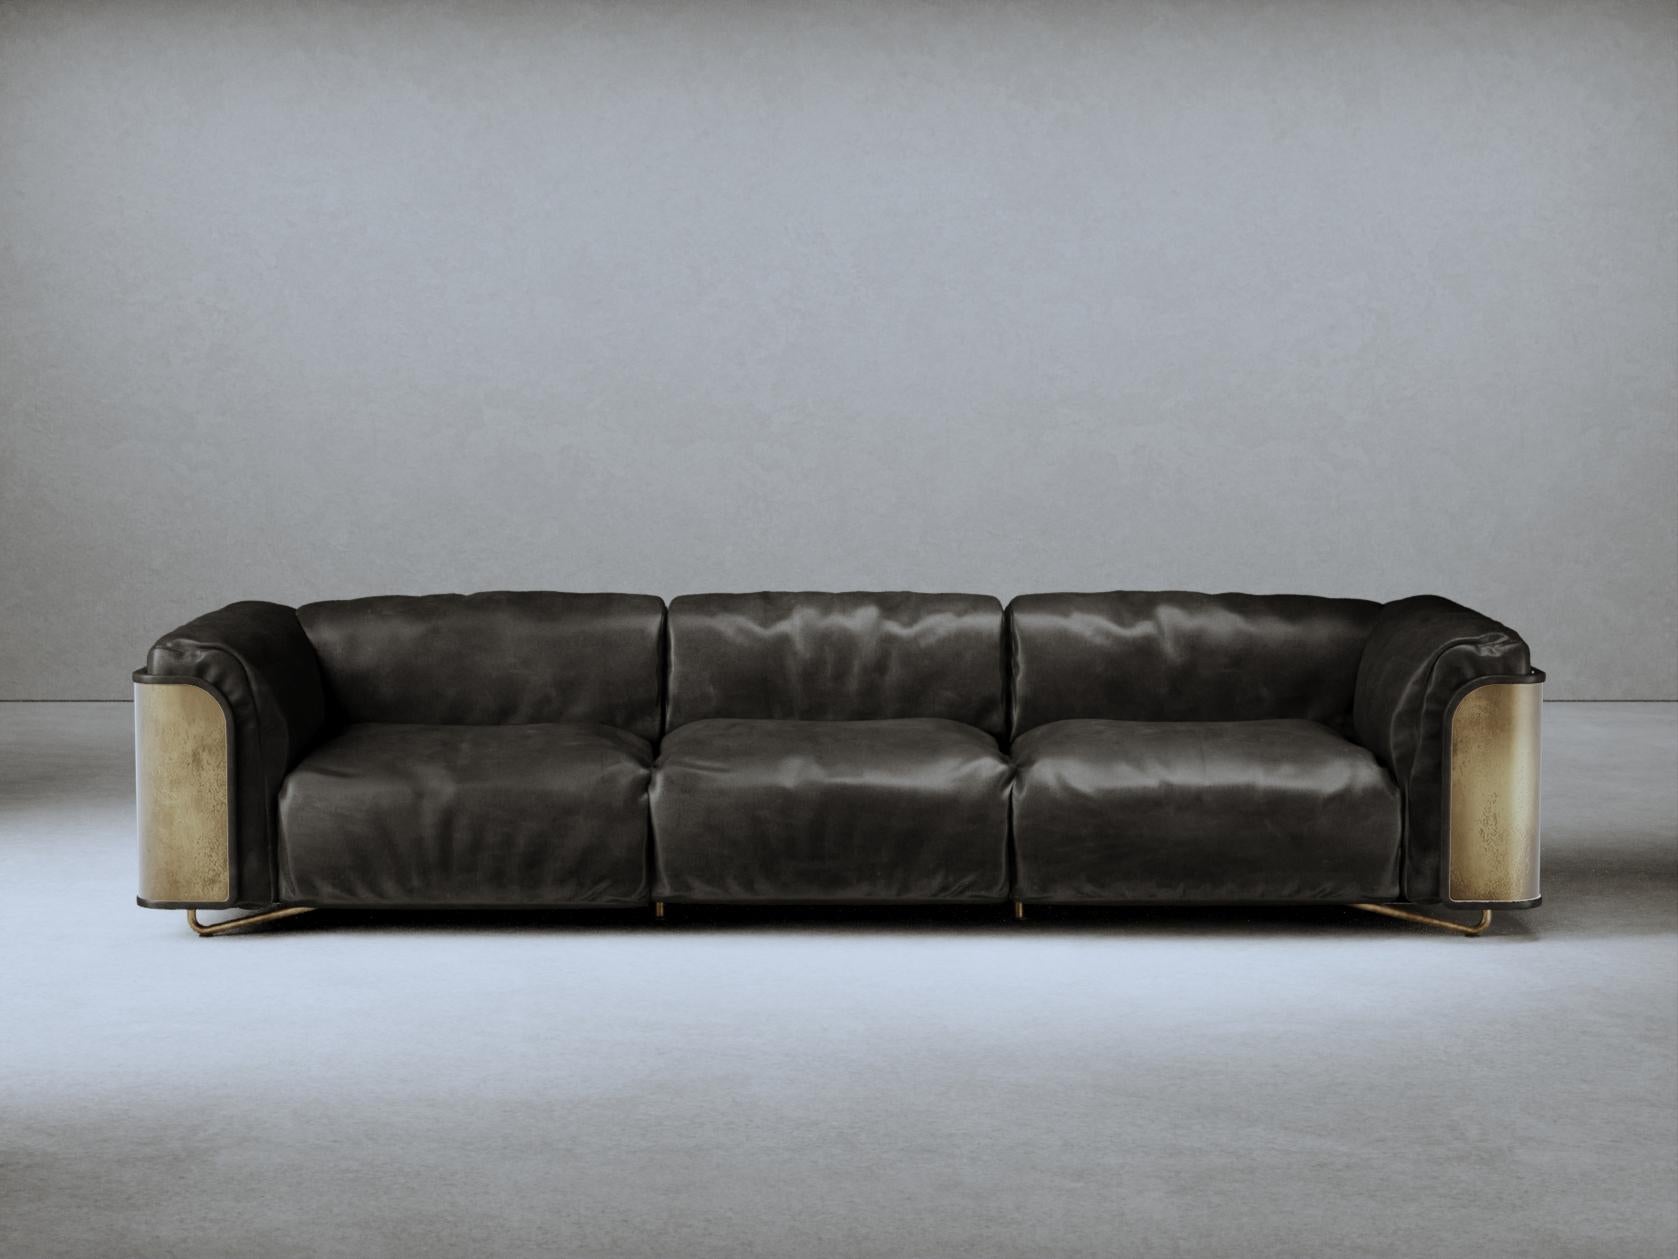 Black Leather Saint Germain Sofa by Gio Pagani
Dimensions: D 90 x W 293 x H 66 cm. SH: 40 cm.
Materials: Black timeless leather and raw brass.

Also available in Nimbus fabric and in Stone colored leather. Please contact us.

In a fluid society